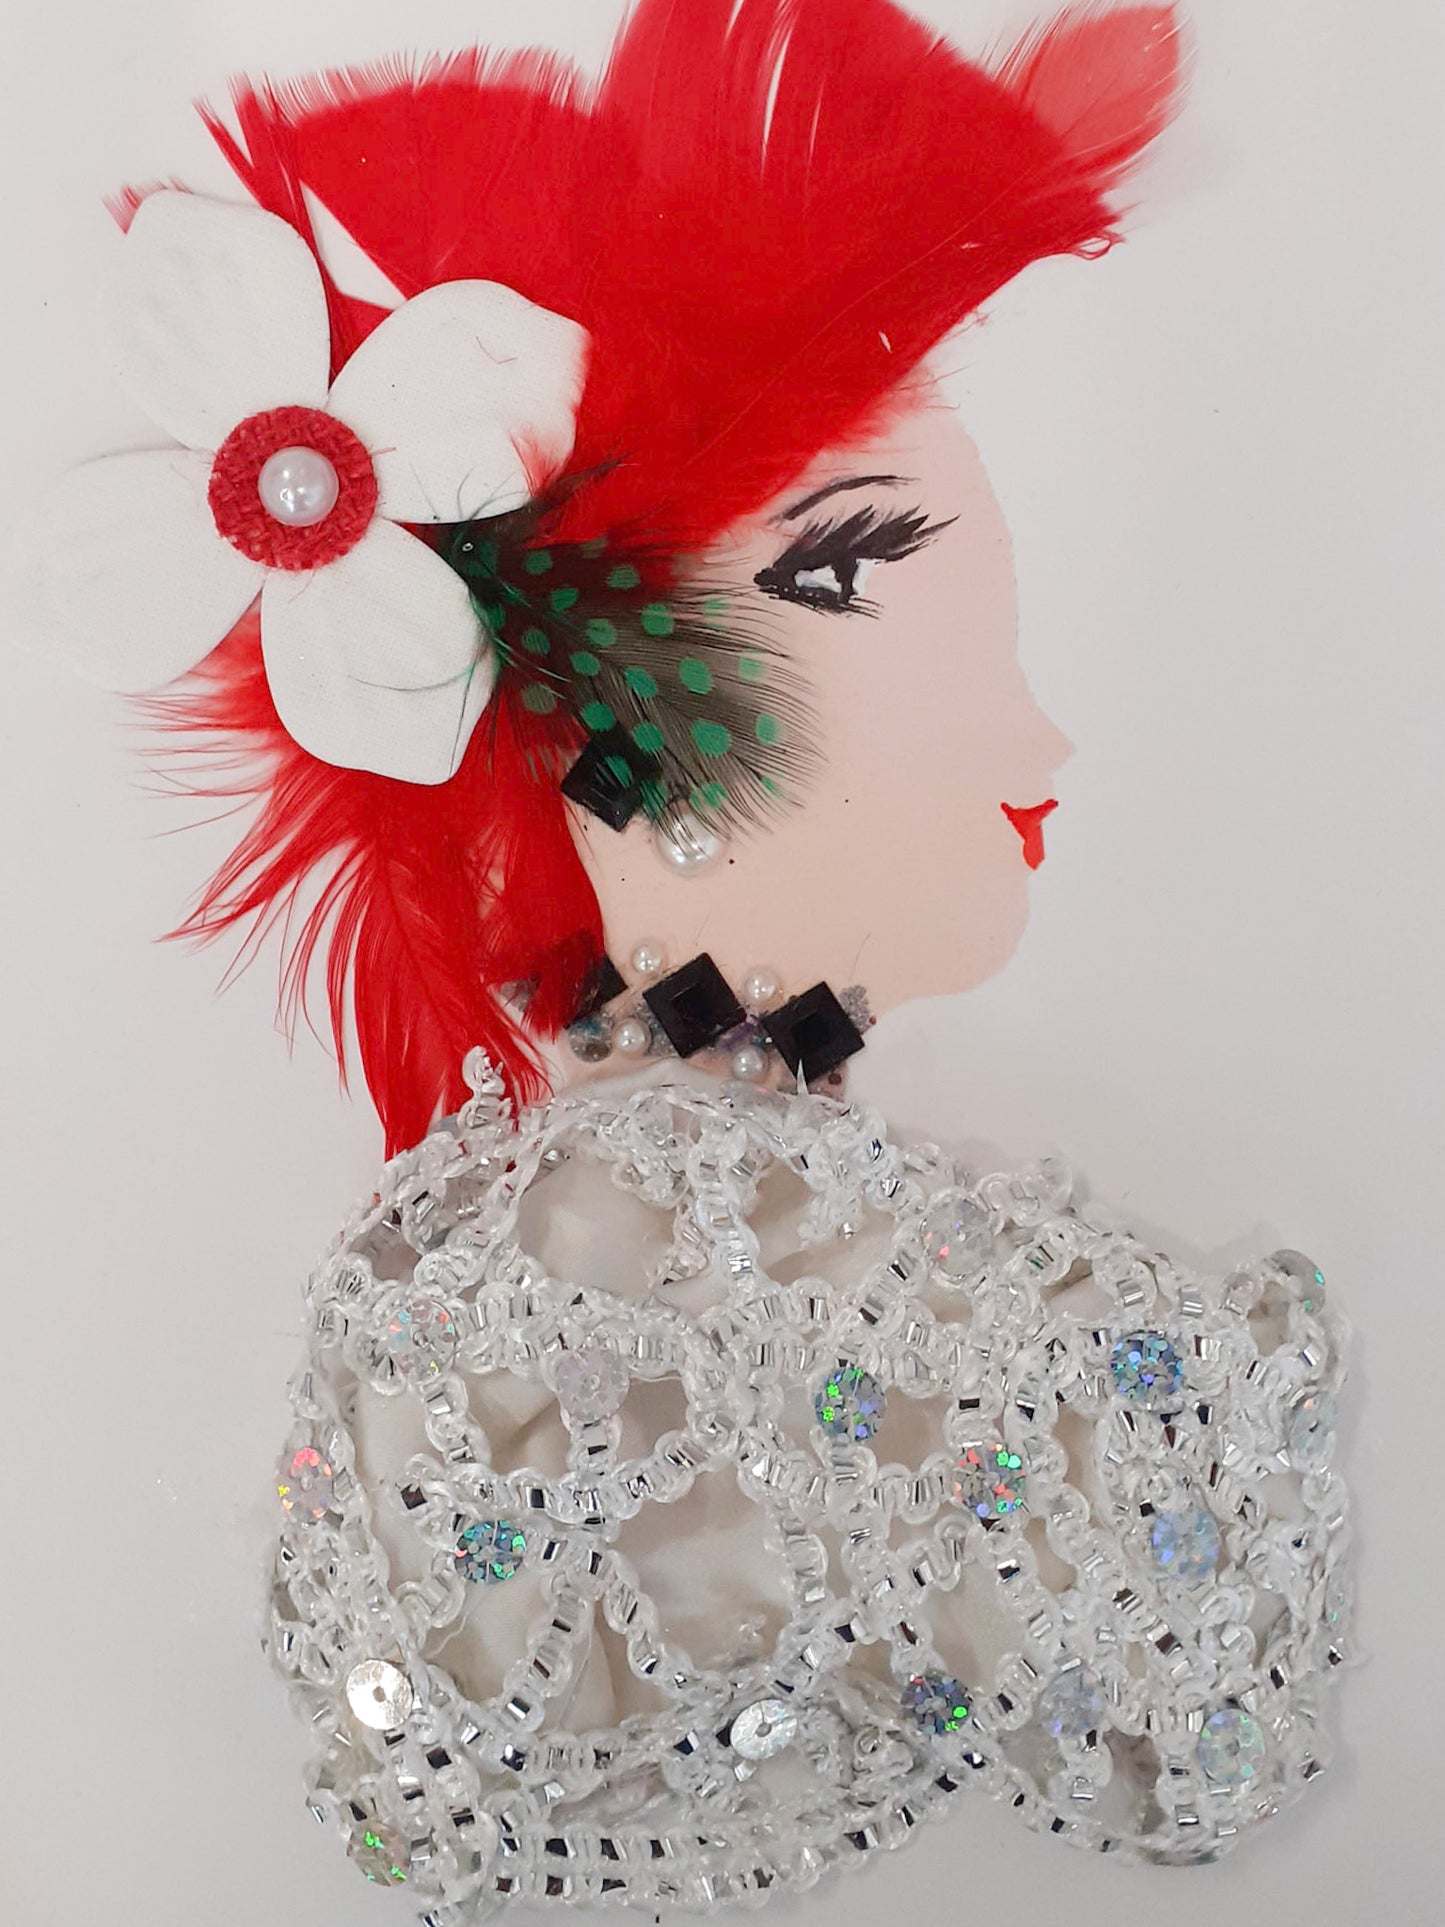 This card is named Dazzling Dazie. She is wearing a white dress made of a white and silver sequined material, a black diamond necklace, and on her head there is a red feather headress with another black and green polka-dotted accent feather. 